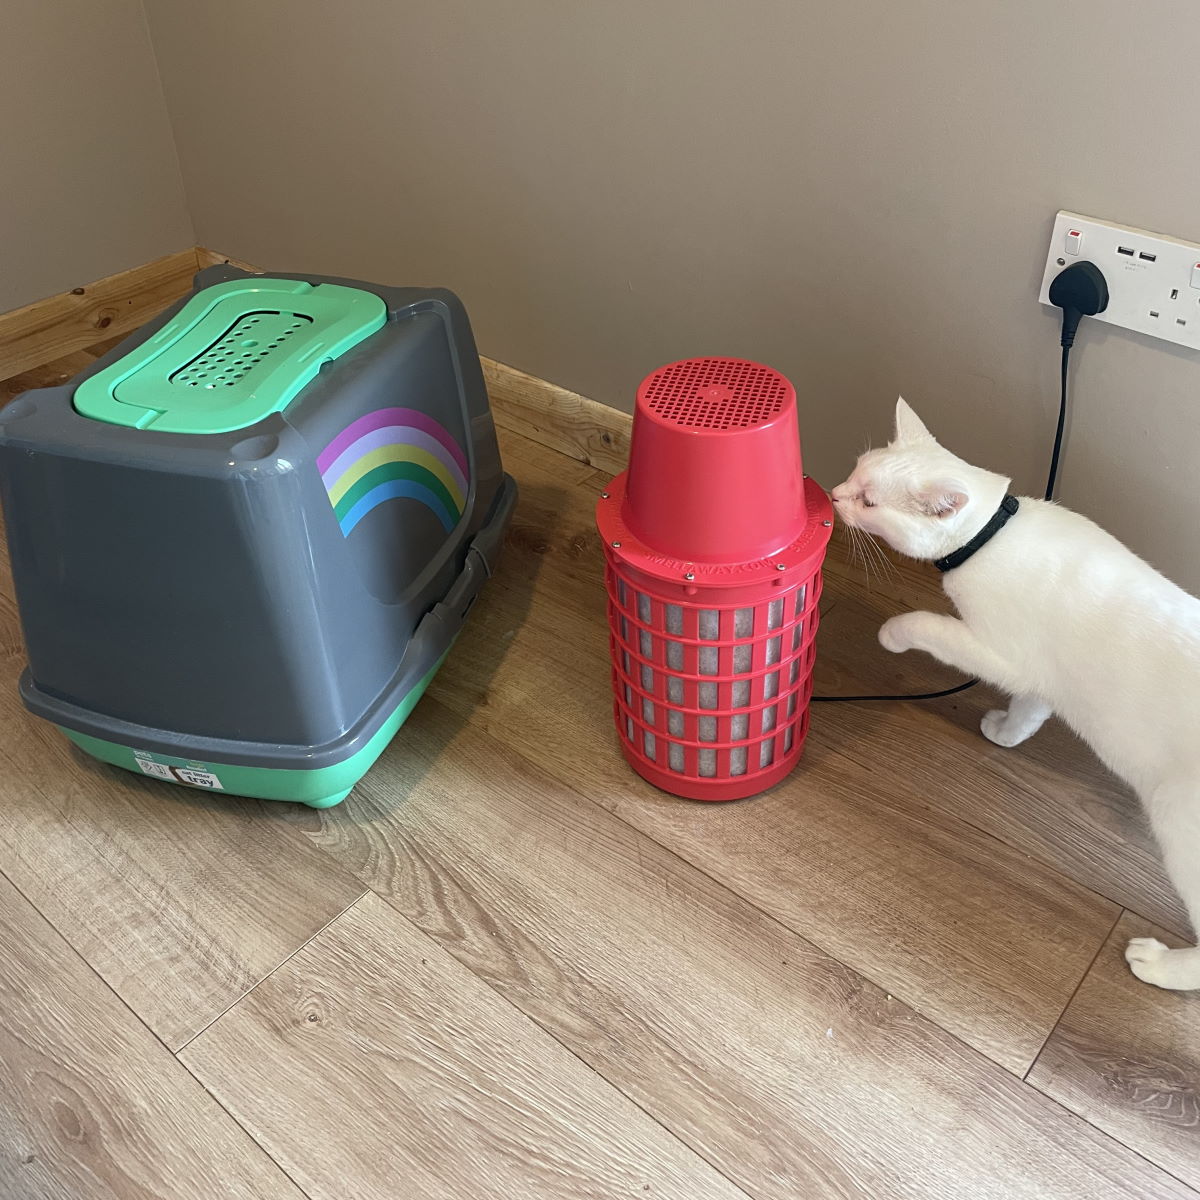 Smell Away SA1 early prototype working next to cat litter tray and Bea the cat